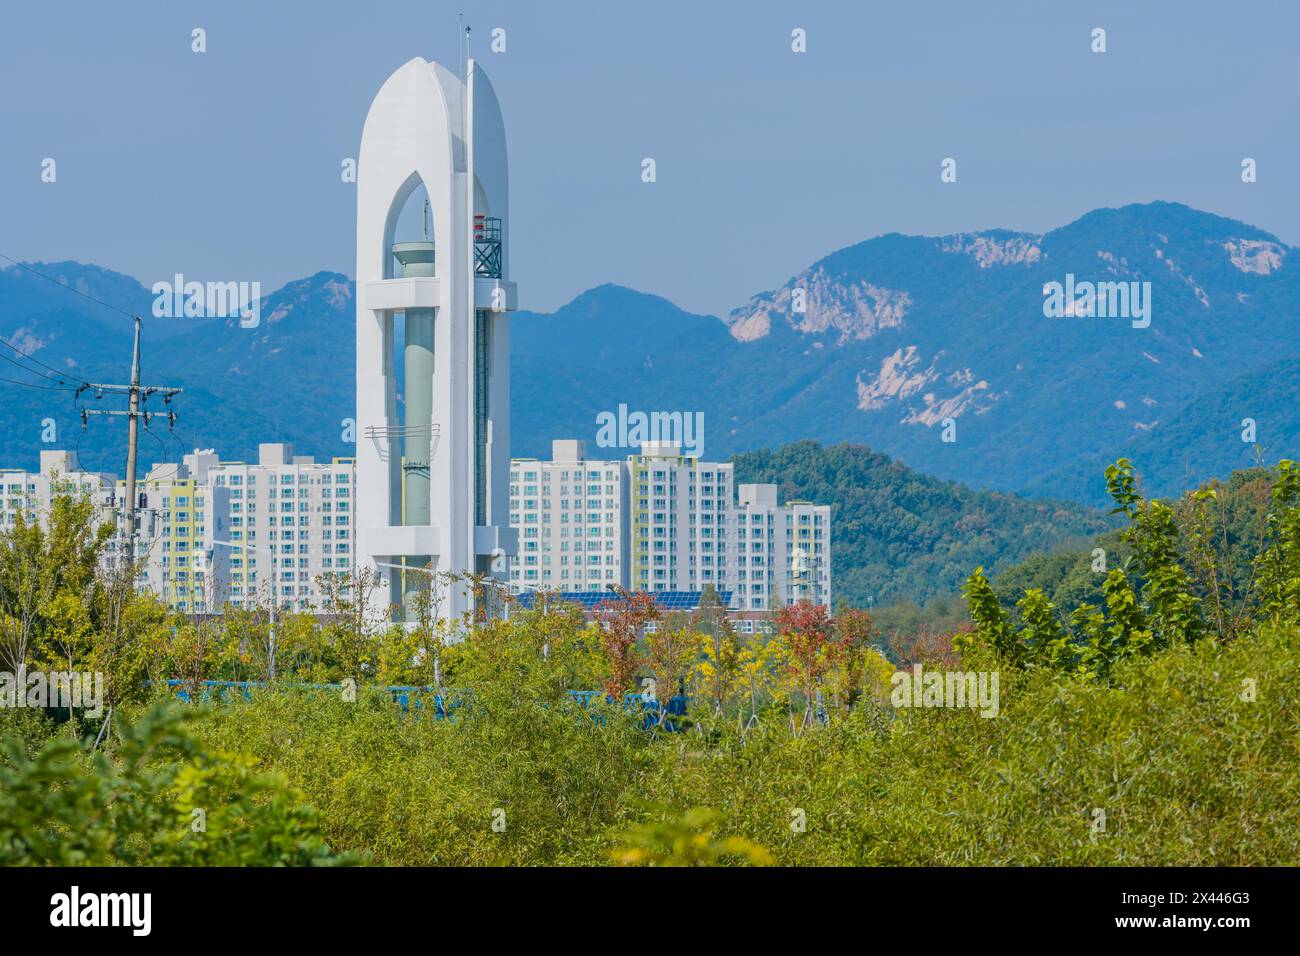 Tall white tower with three sides and cylindrical metal column in middle standing in woodland area with high rise apartments and mountains in Stock Photo